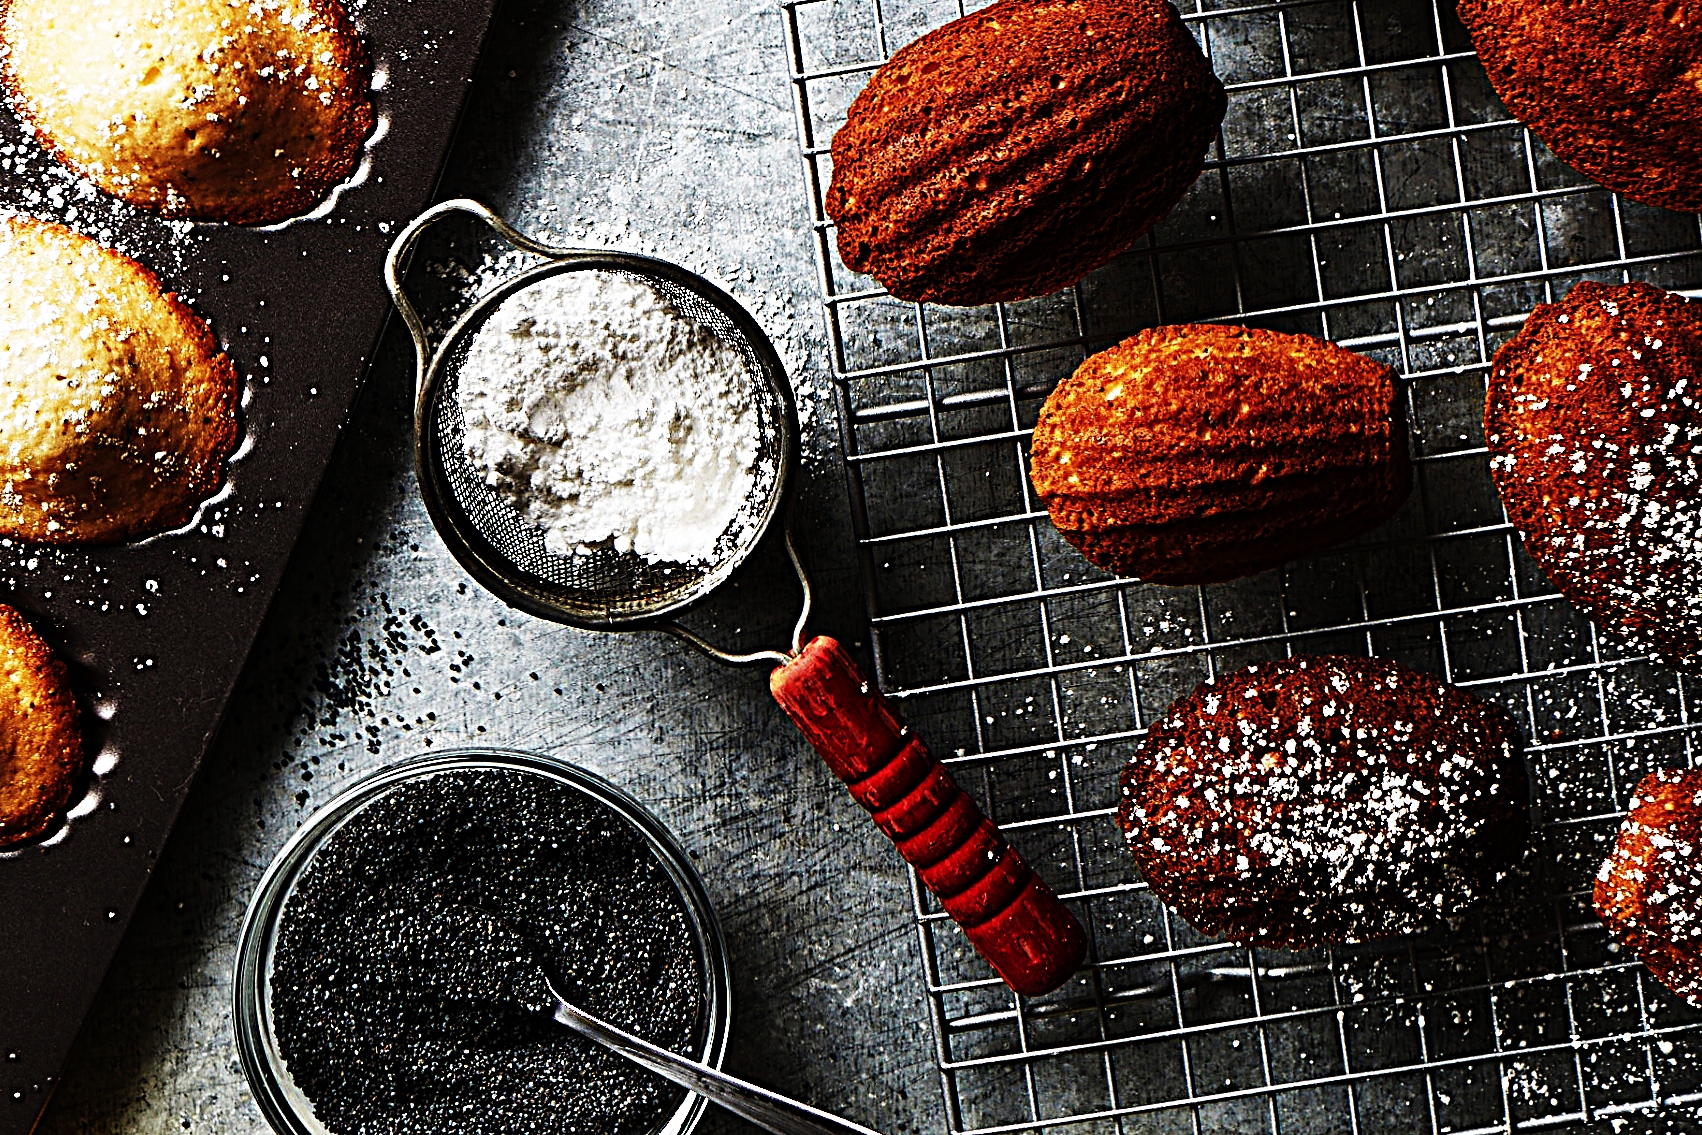 Stupid-Easy Recipe for Lemon Poppyseed Madeleines (#1 Top-Rated)